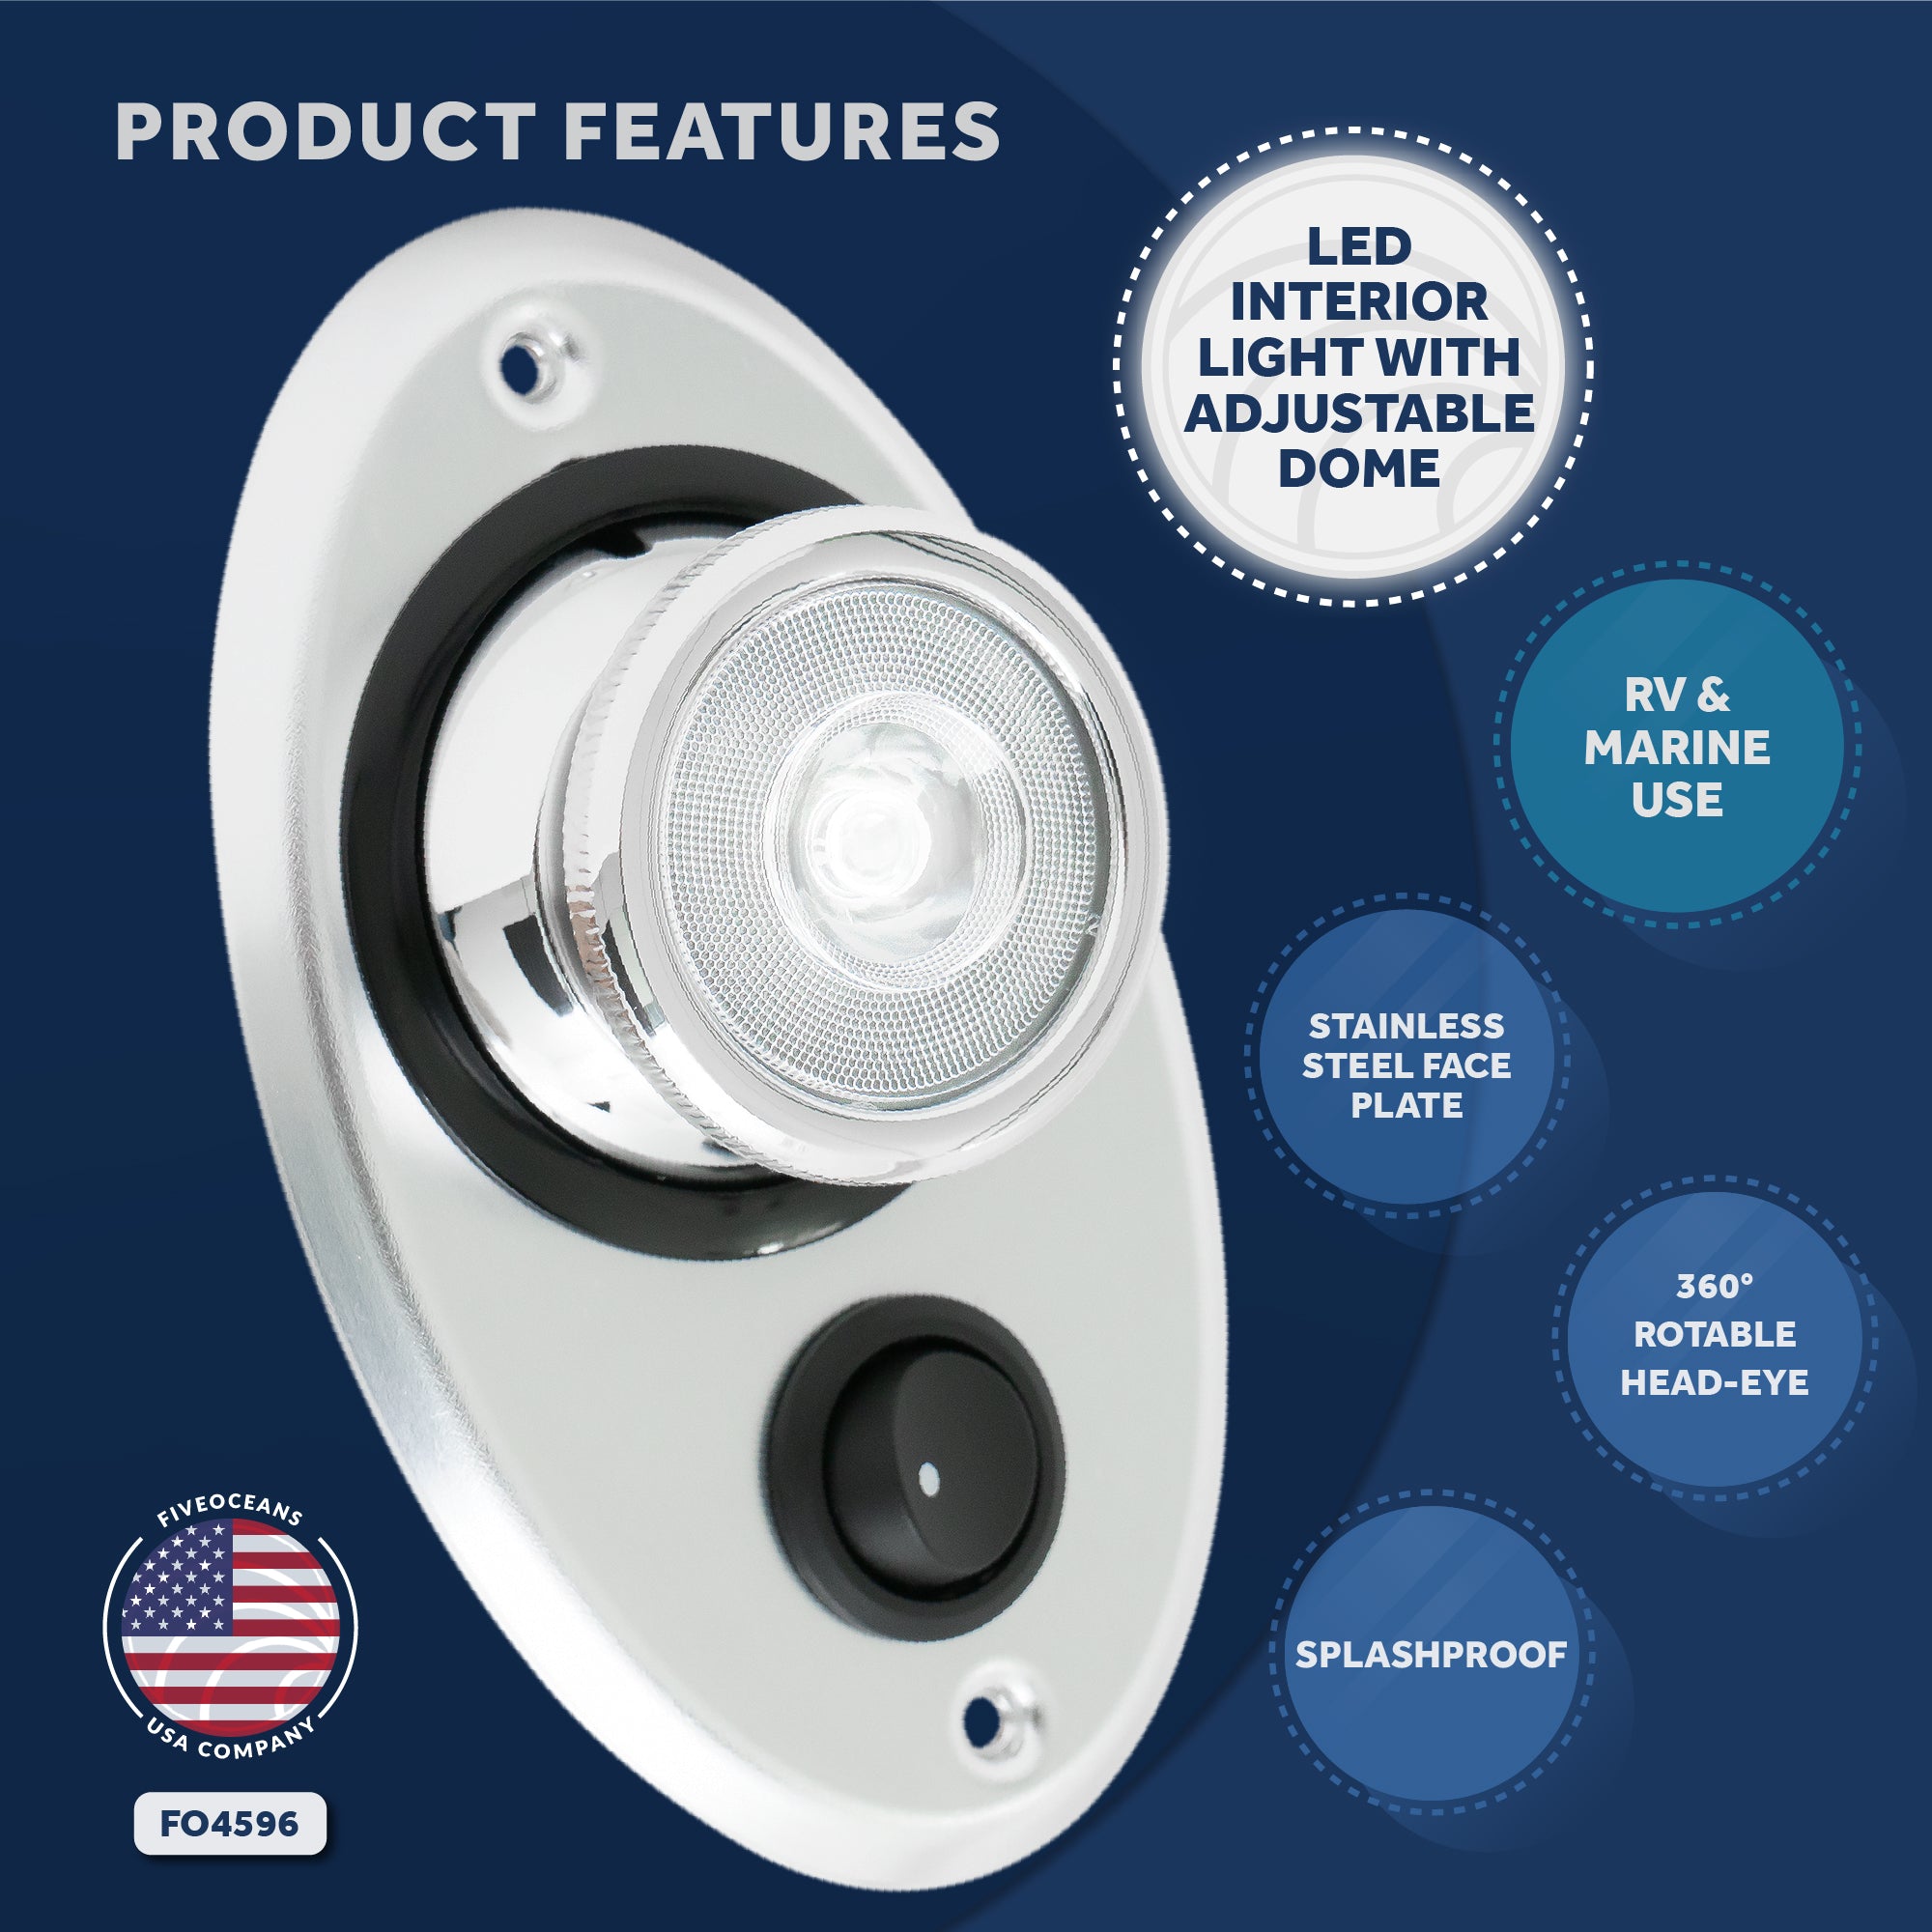 Interior LED light with Adjustable 360 Degree Eye-Balled Rotation, On/Off Rocker Switch - FO4596